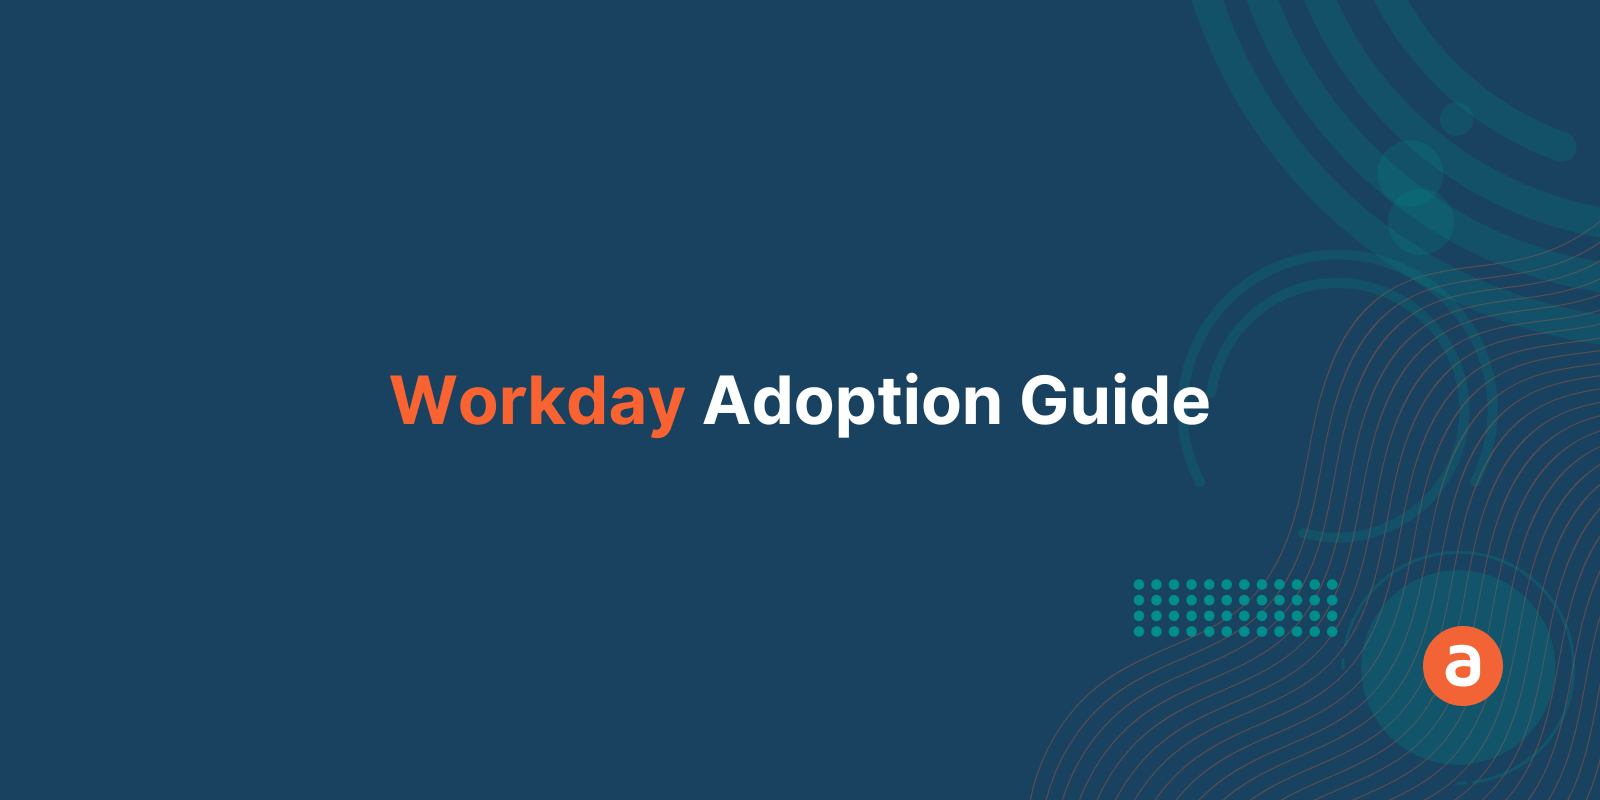 Workday Adoption Guide